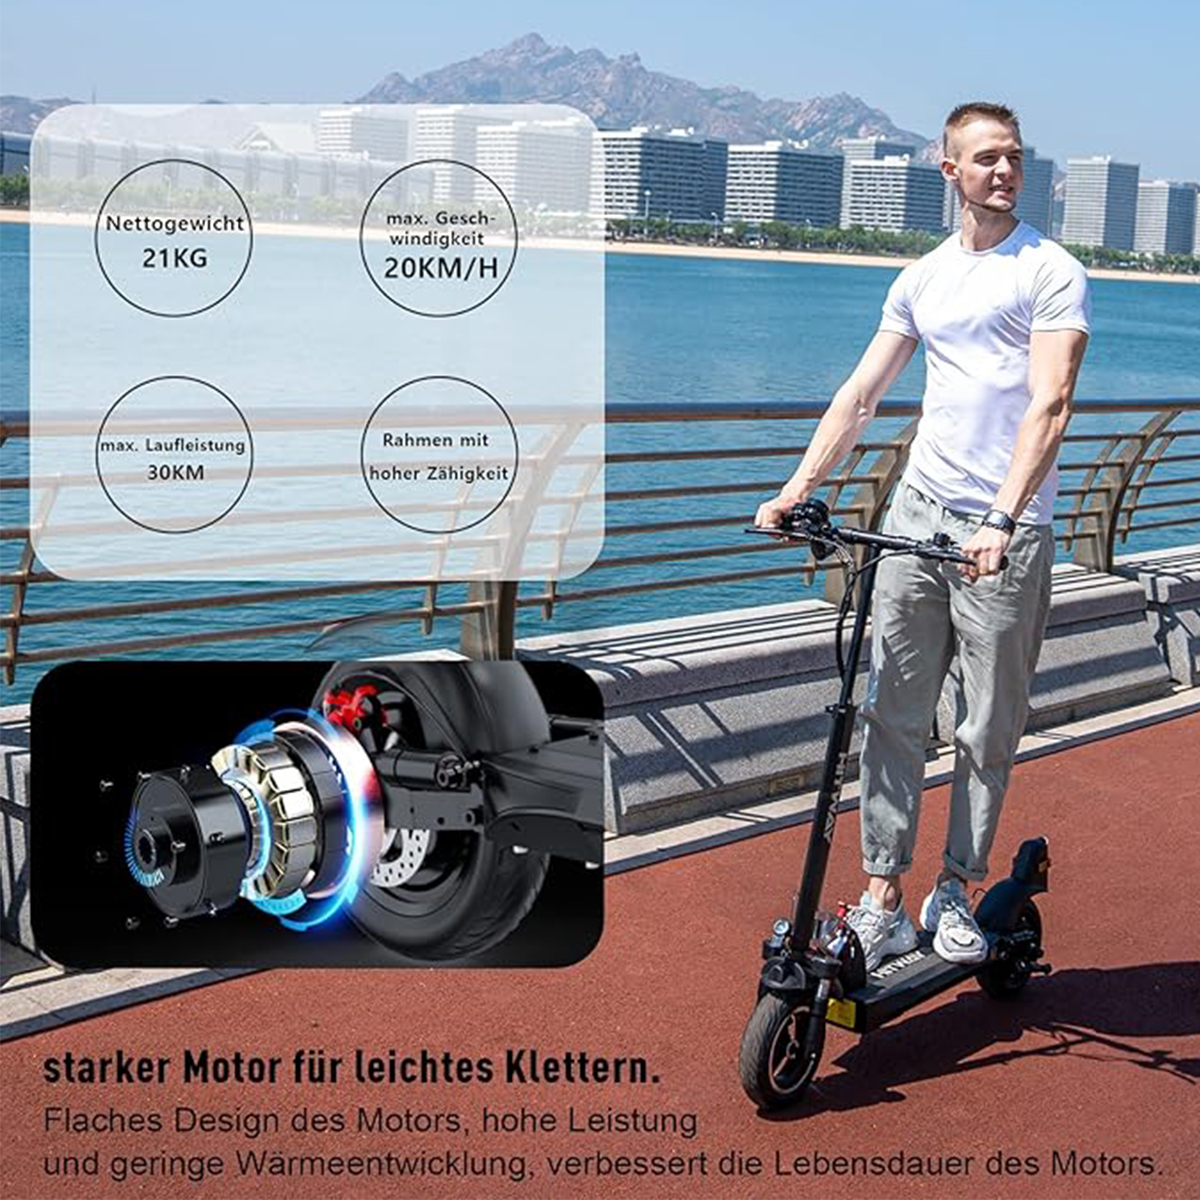 HITWAY H5 Electric Scooter E schwarz) Scooter (10 mit ABE Zoll, E-Scooter Straßenzulassung